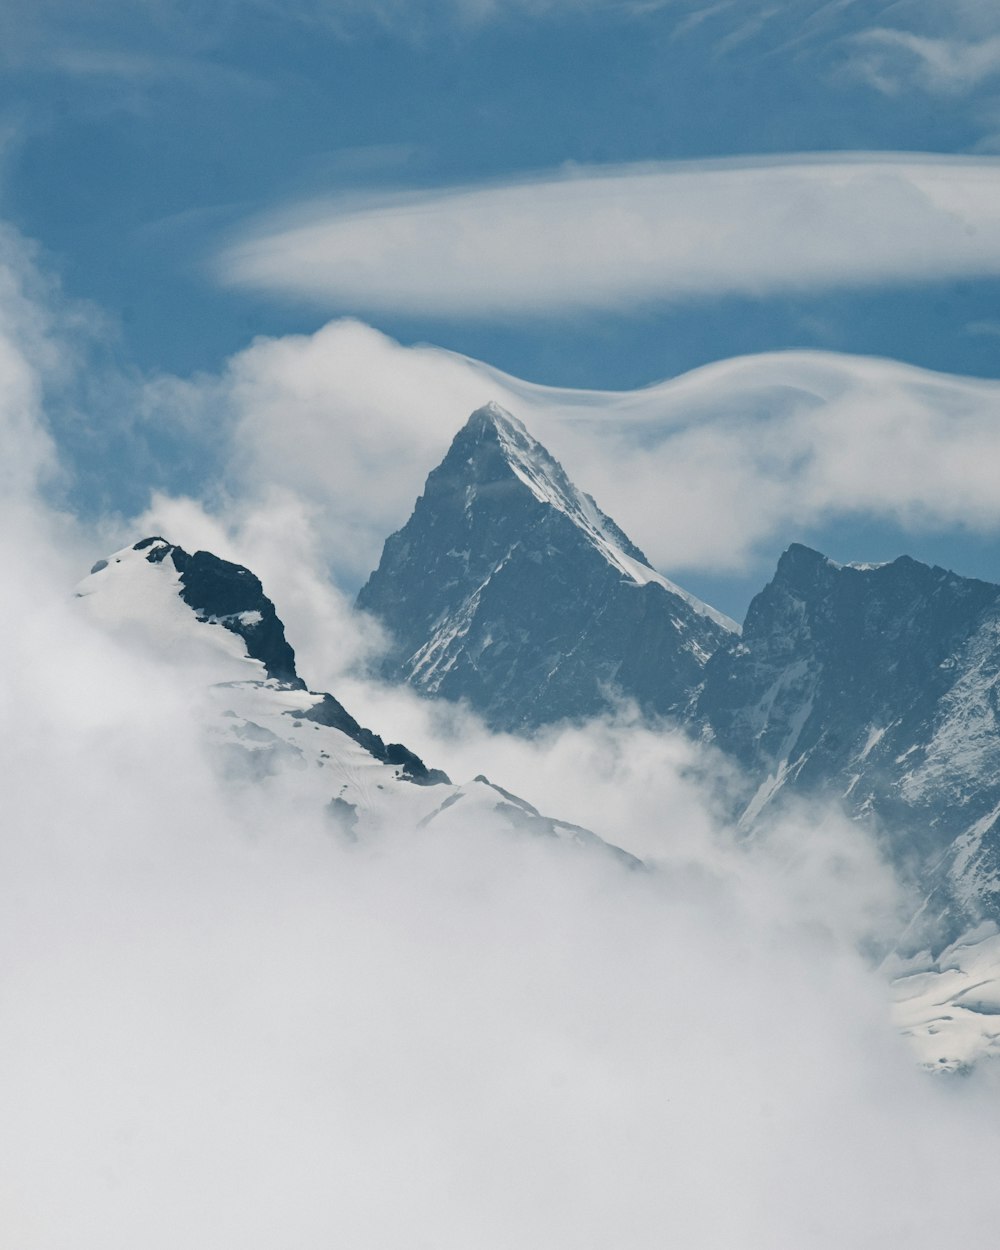 a view of a mountain with clouds in the foreground